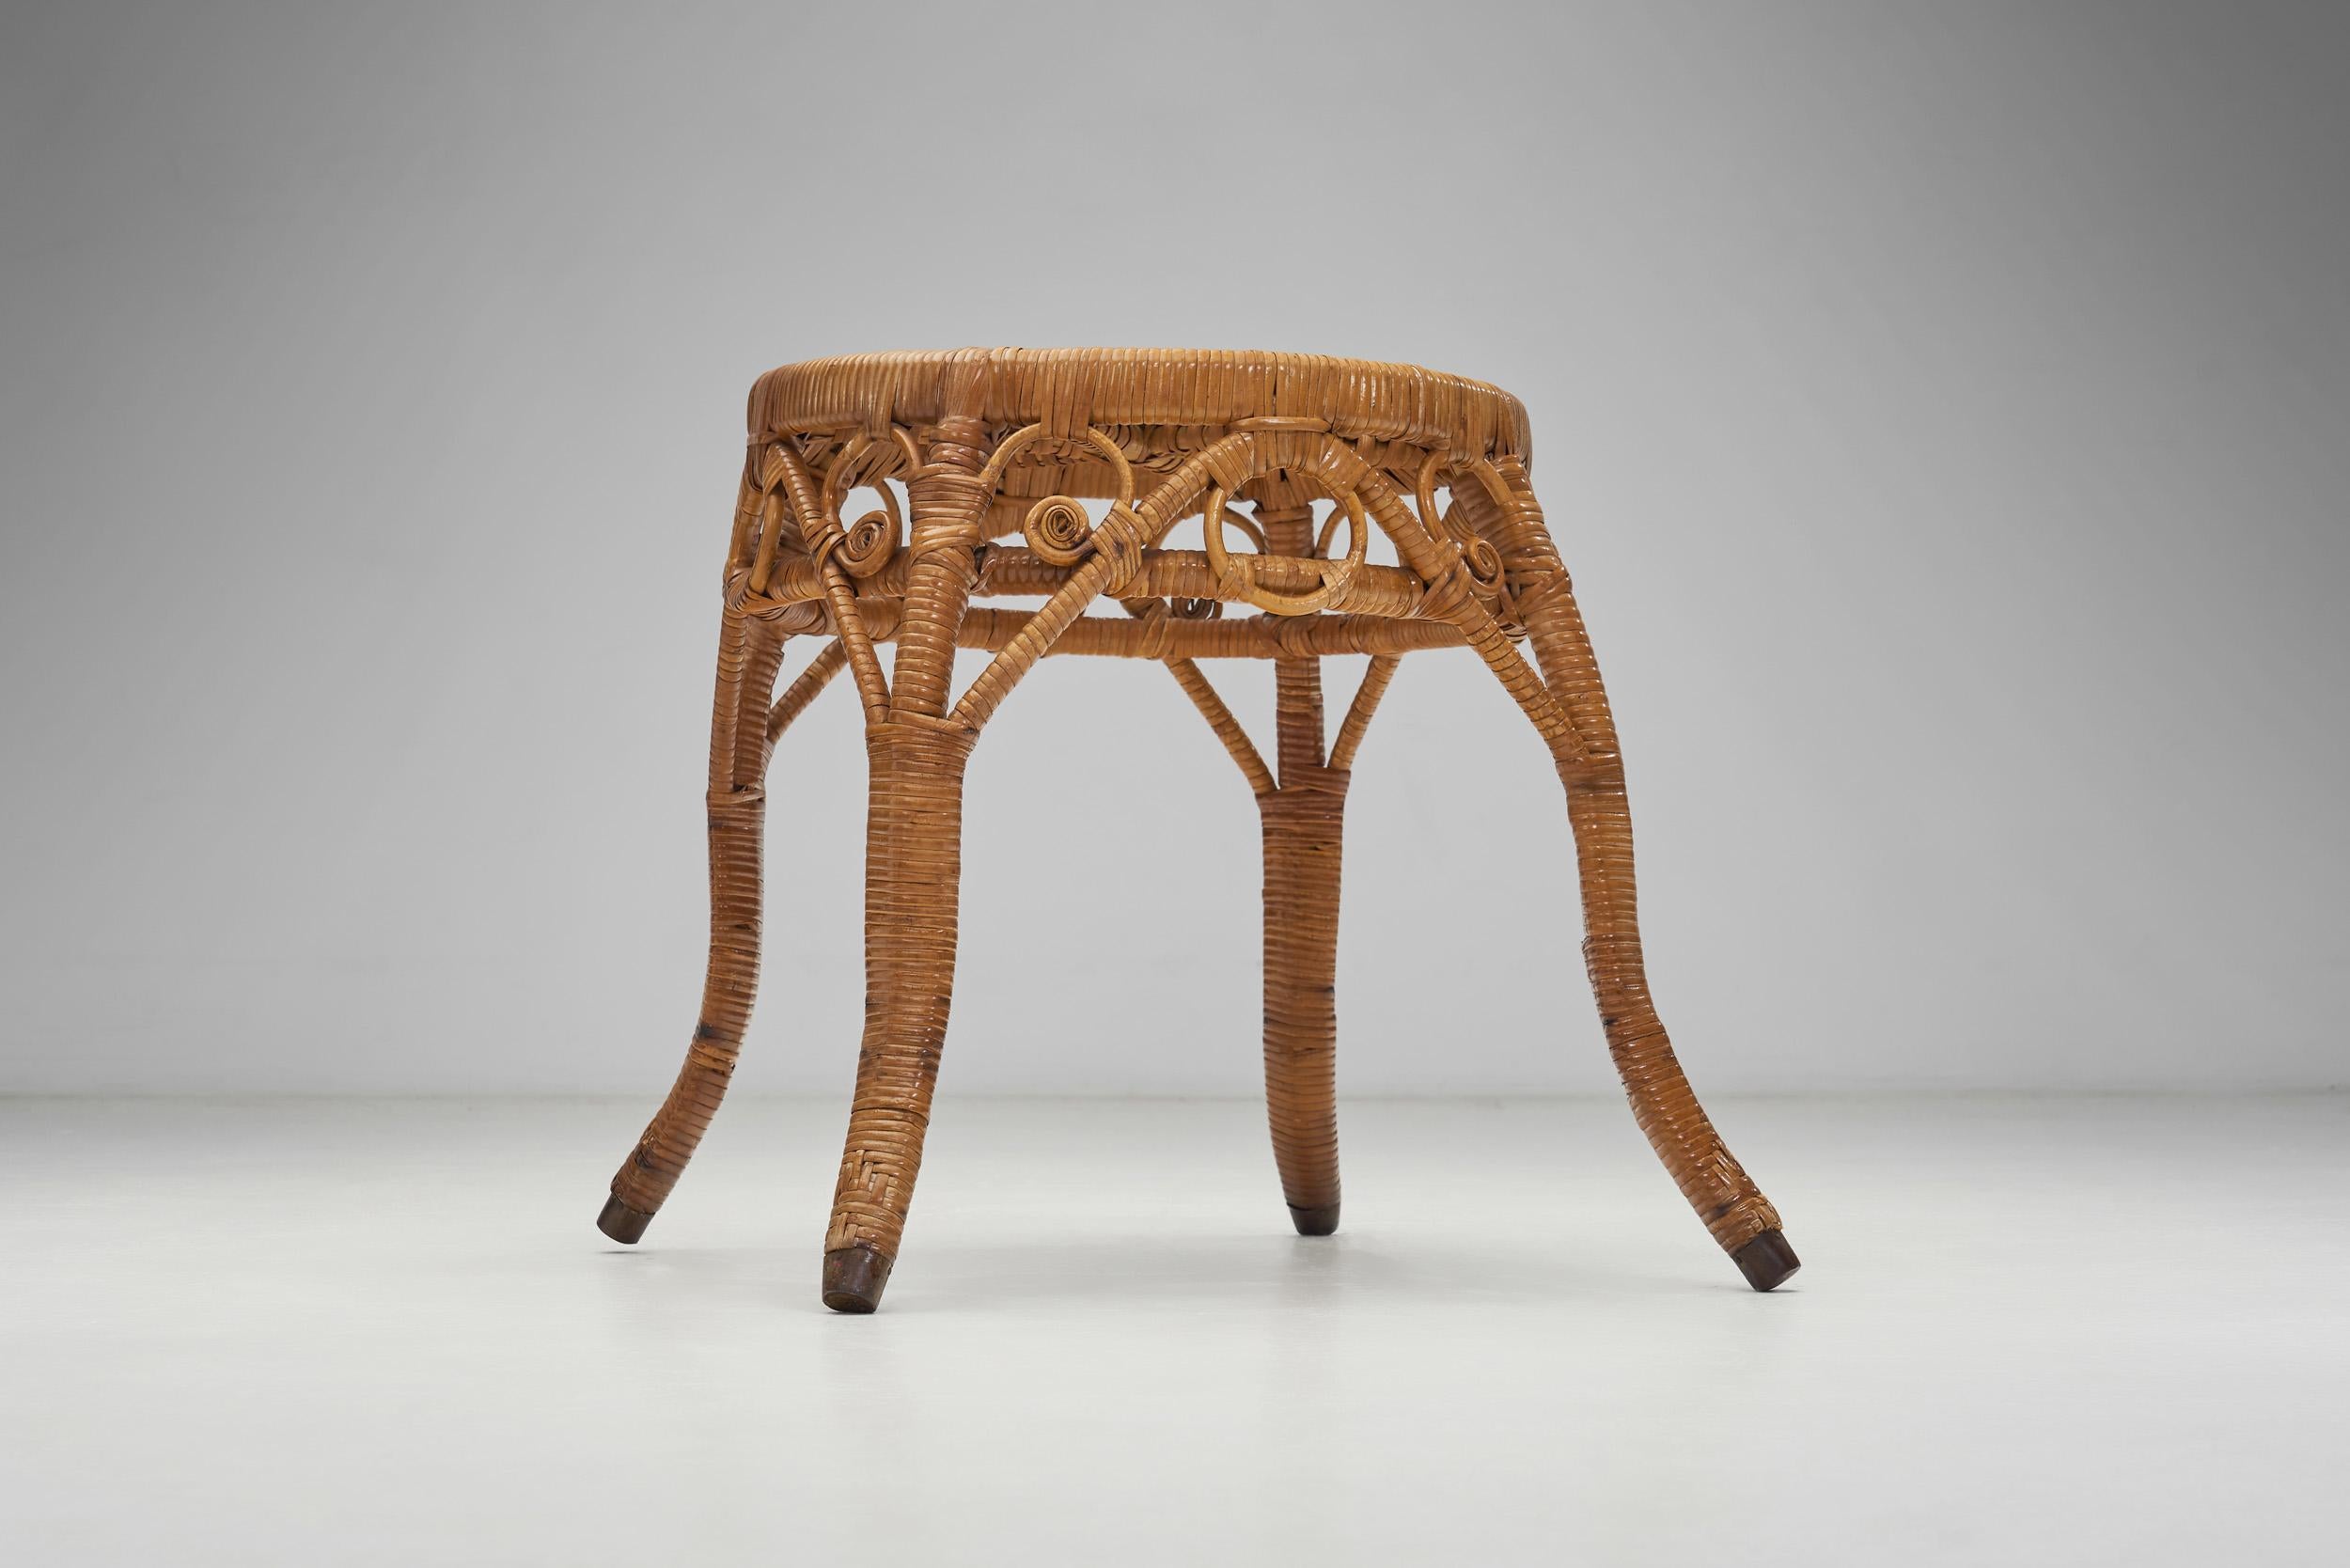 Woven Rattan Stool, Europe Early 20th Century For Sale 10